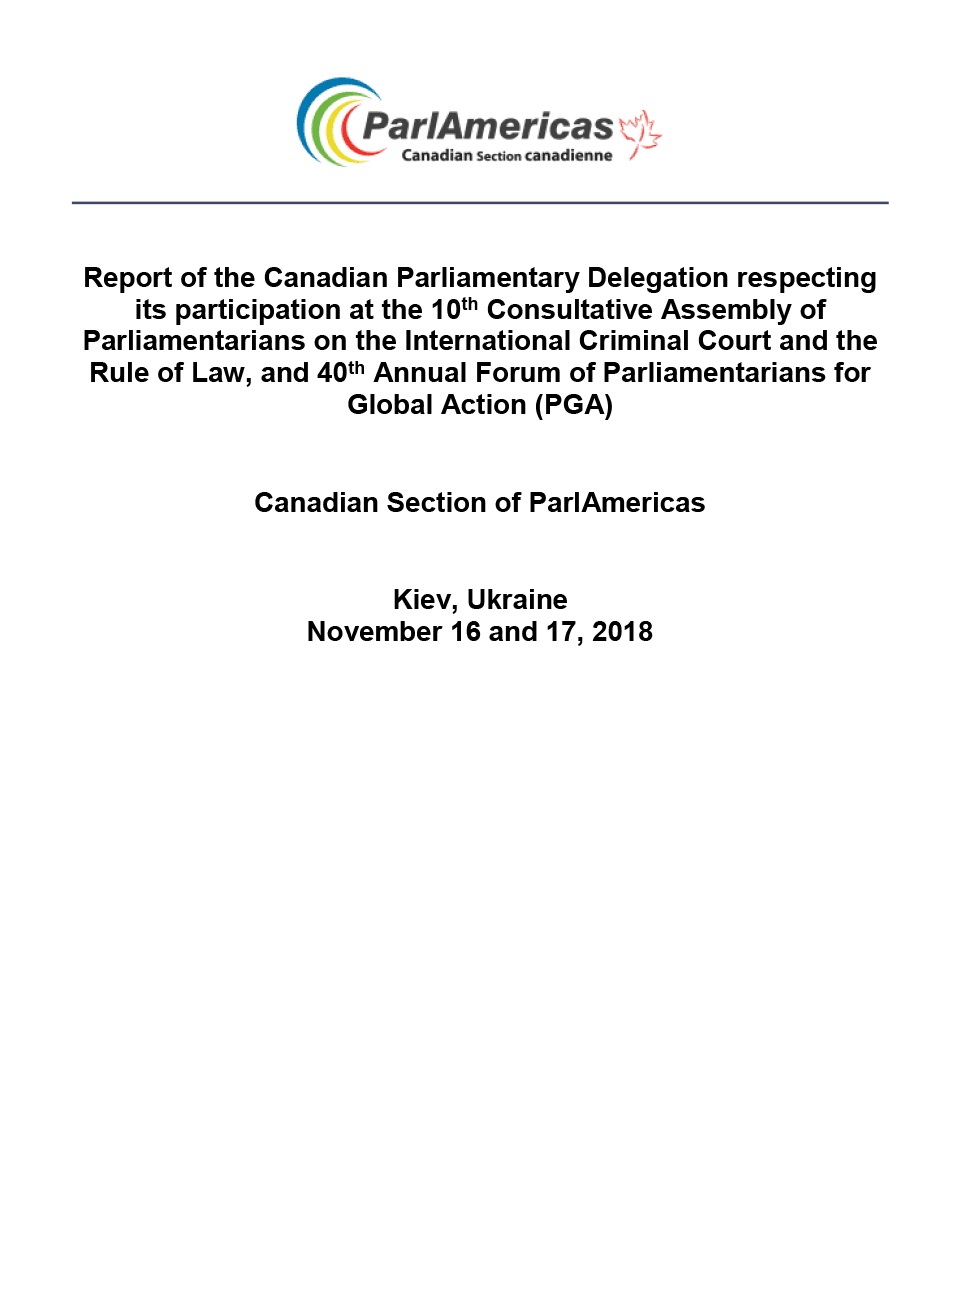 Report of the Canadian Parliamentary Delegation on its participation ...